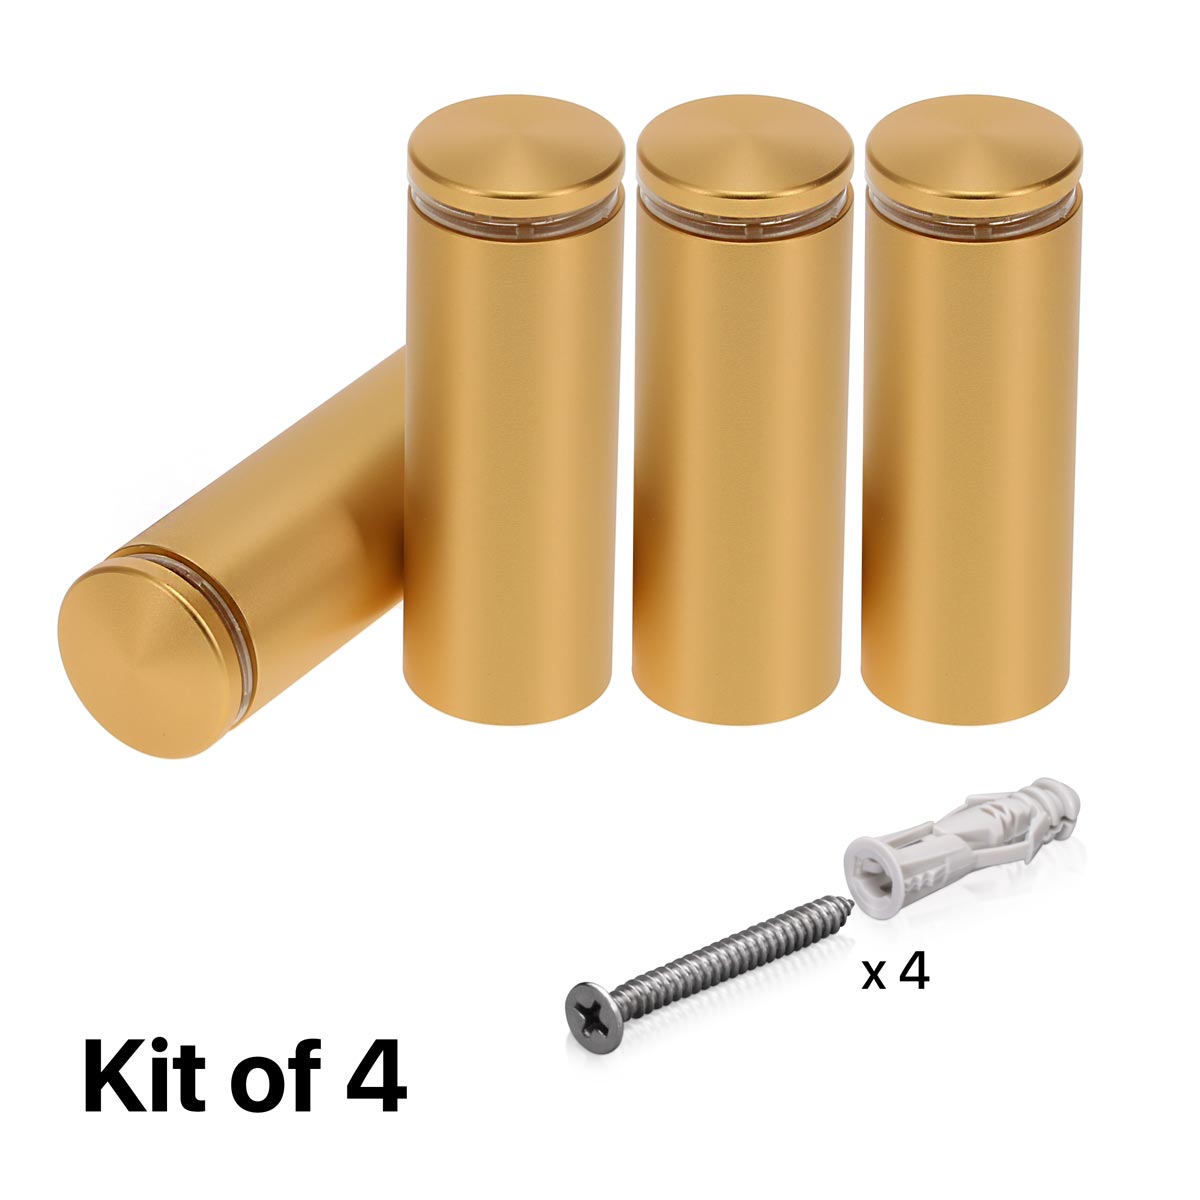 (Set of 4) 1'' Diameter X 2-1/2 Barrel Length, Alumi. Rounded Head Standoffs, Matte Champagne Anodized Finish Standoff with (4) 2216Z Screws and (4) LANC1 Anchors for concrete or drywall (For In / Out use) [Required Material Hole Size: 7/16'']